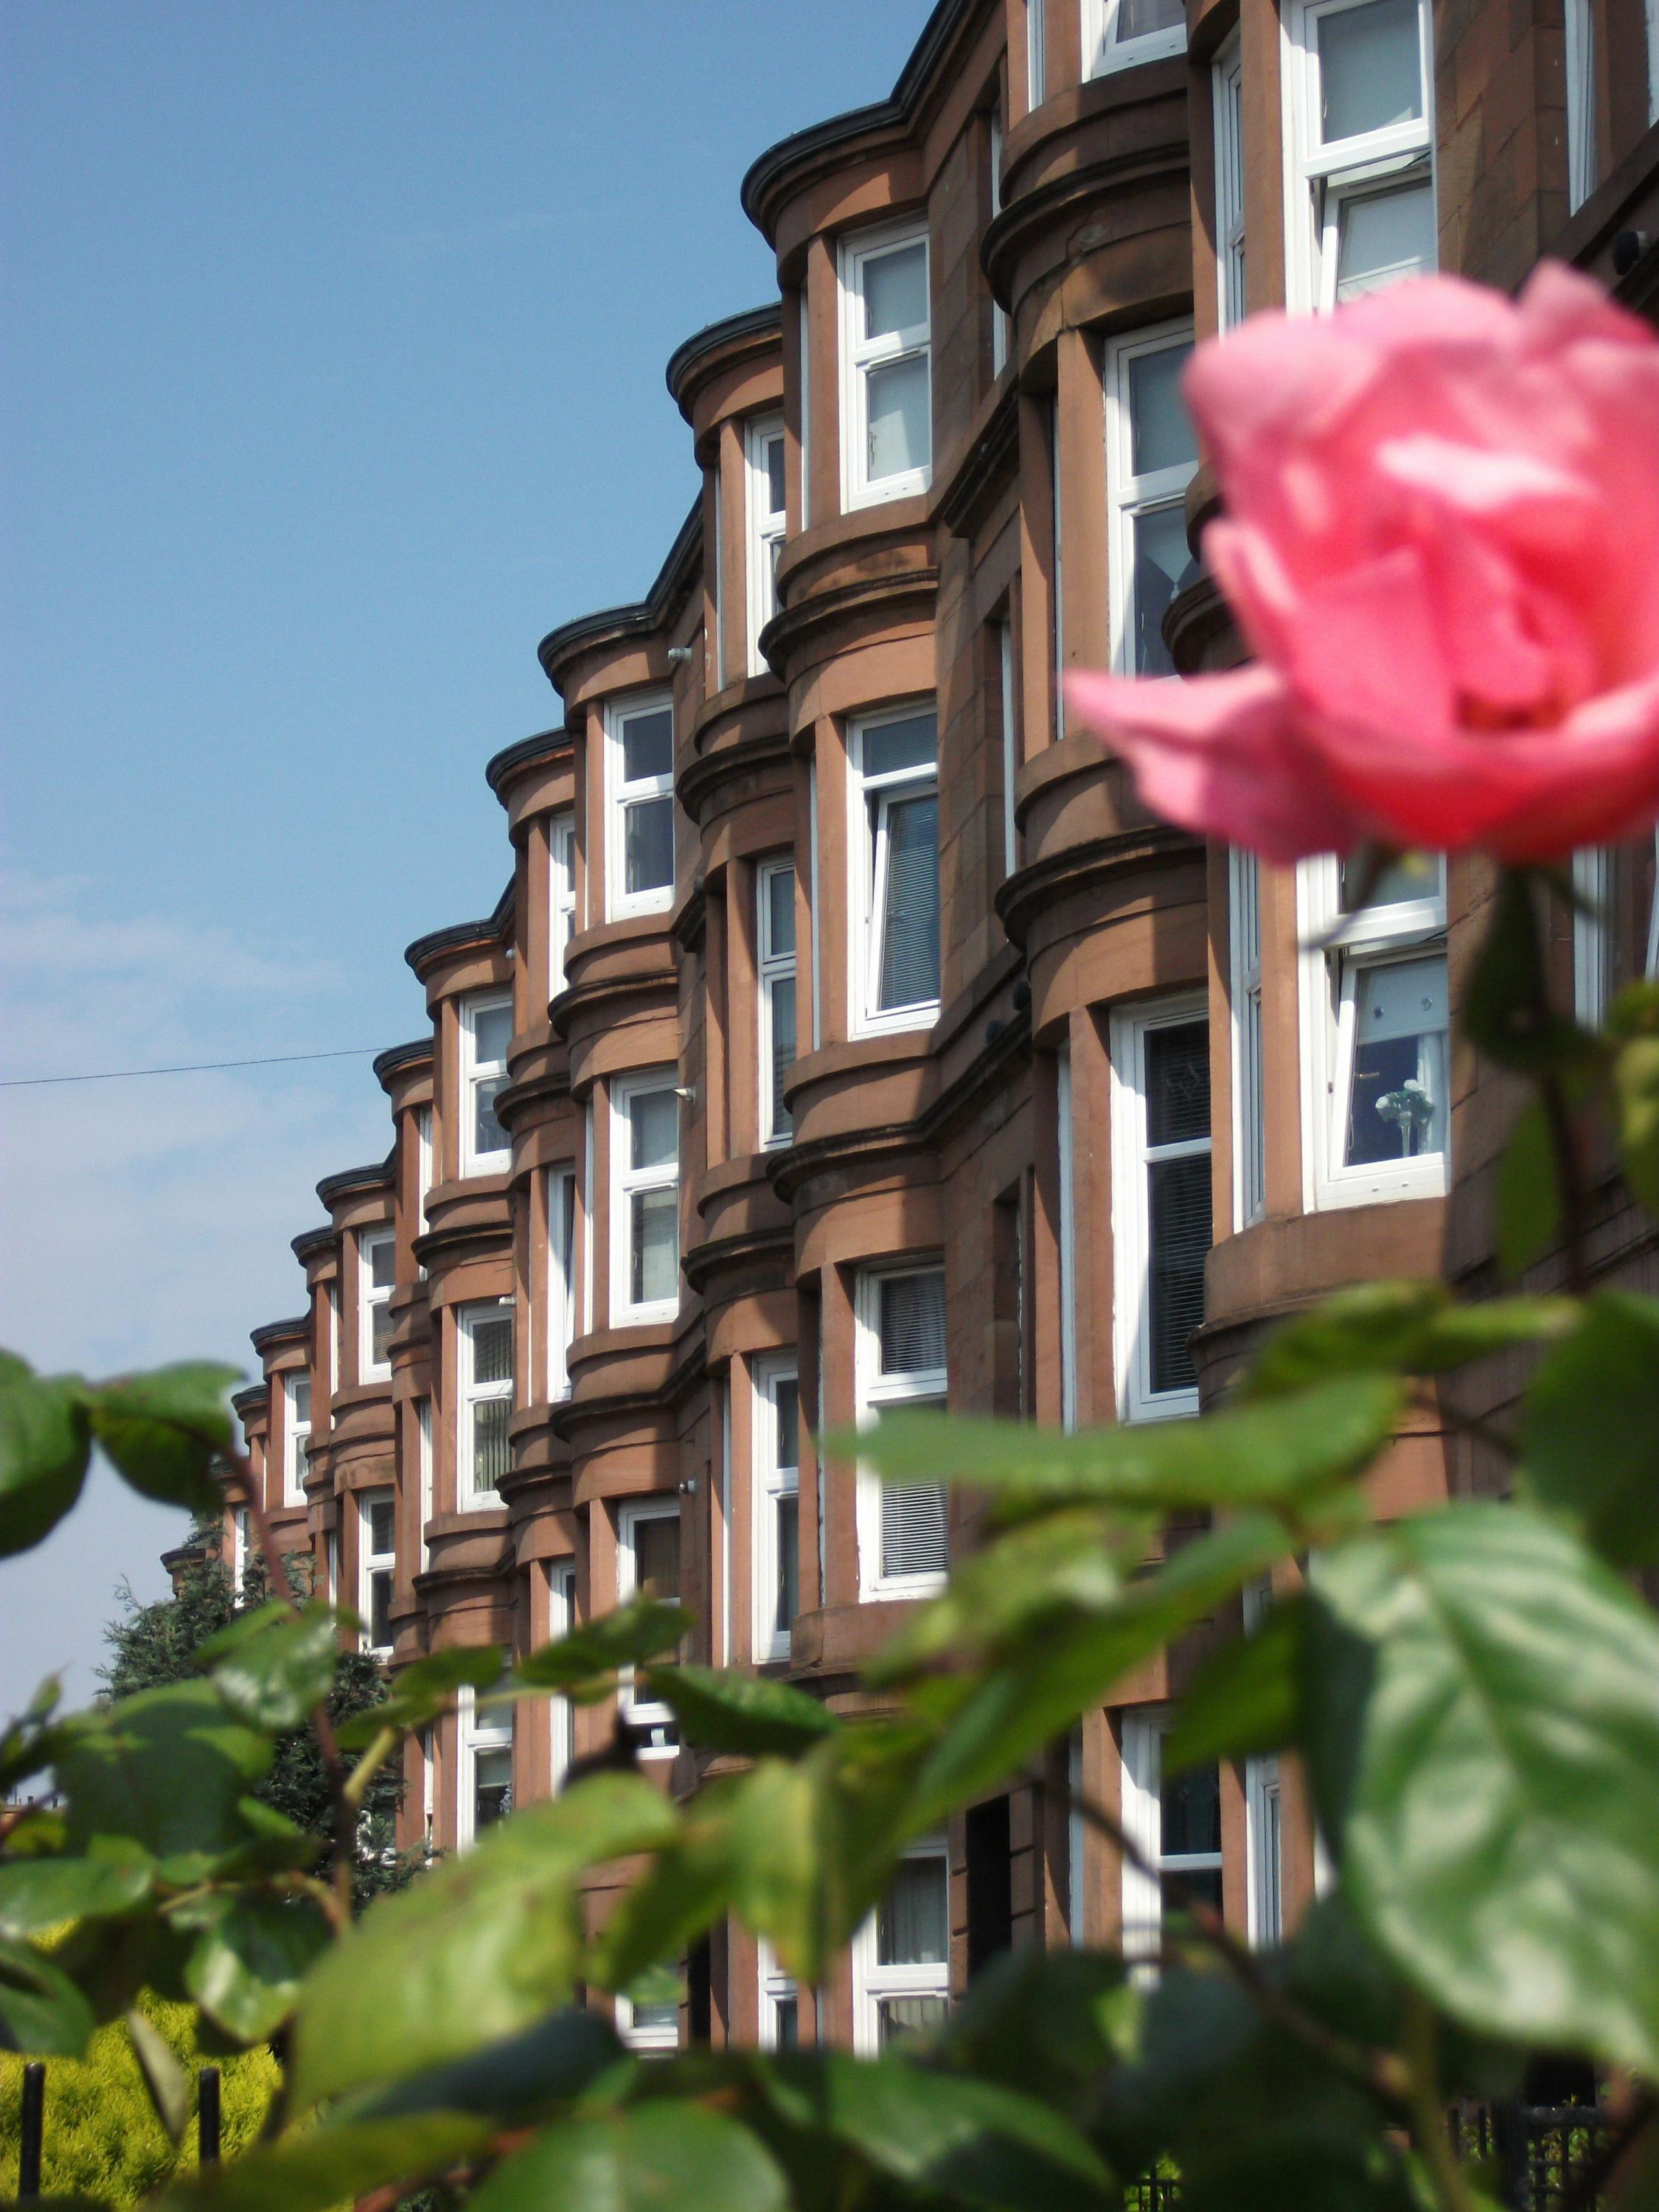 PIC - STOCK - row of white windows with pink flower at front